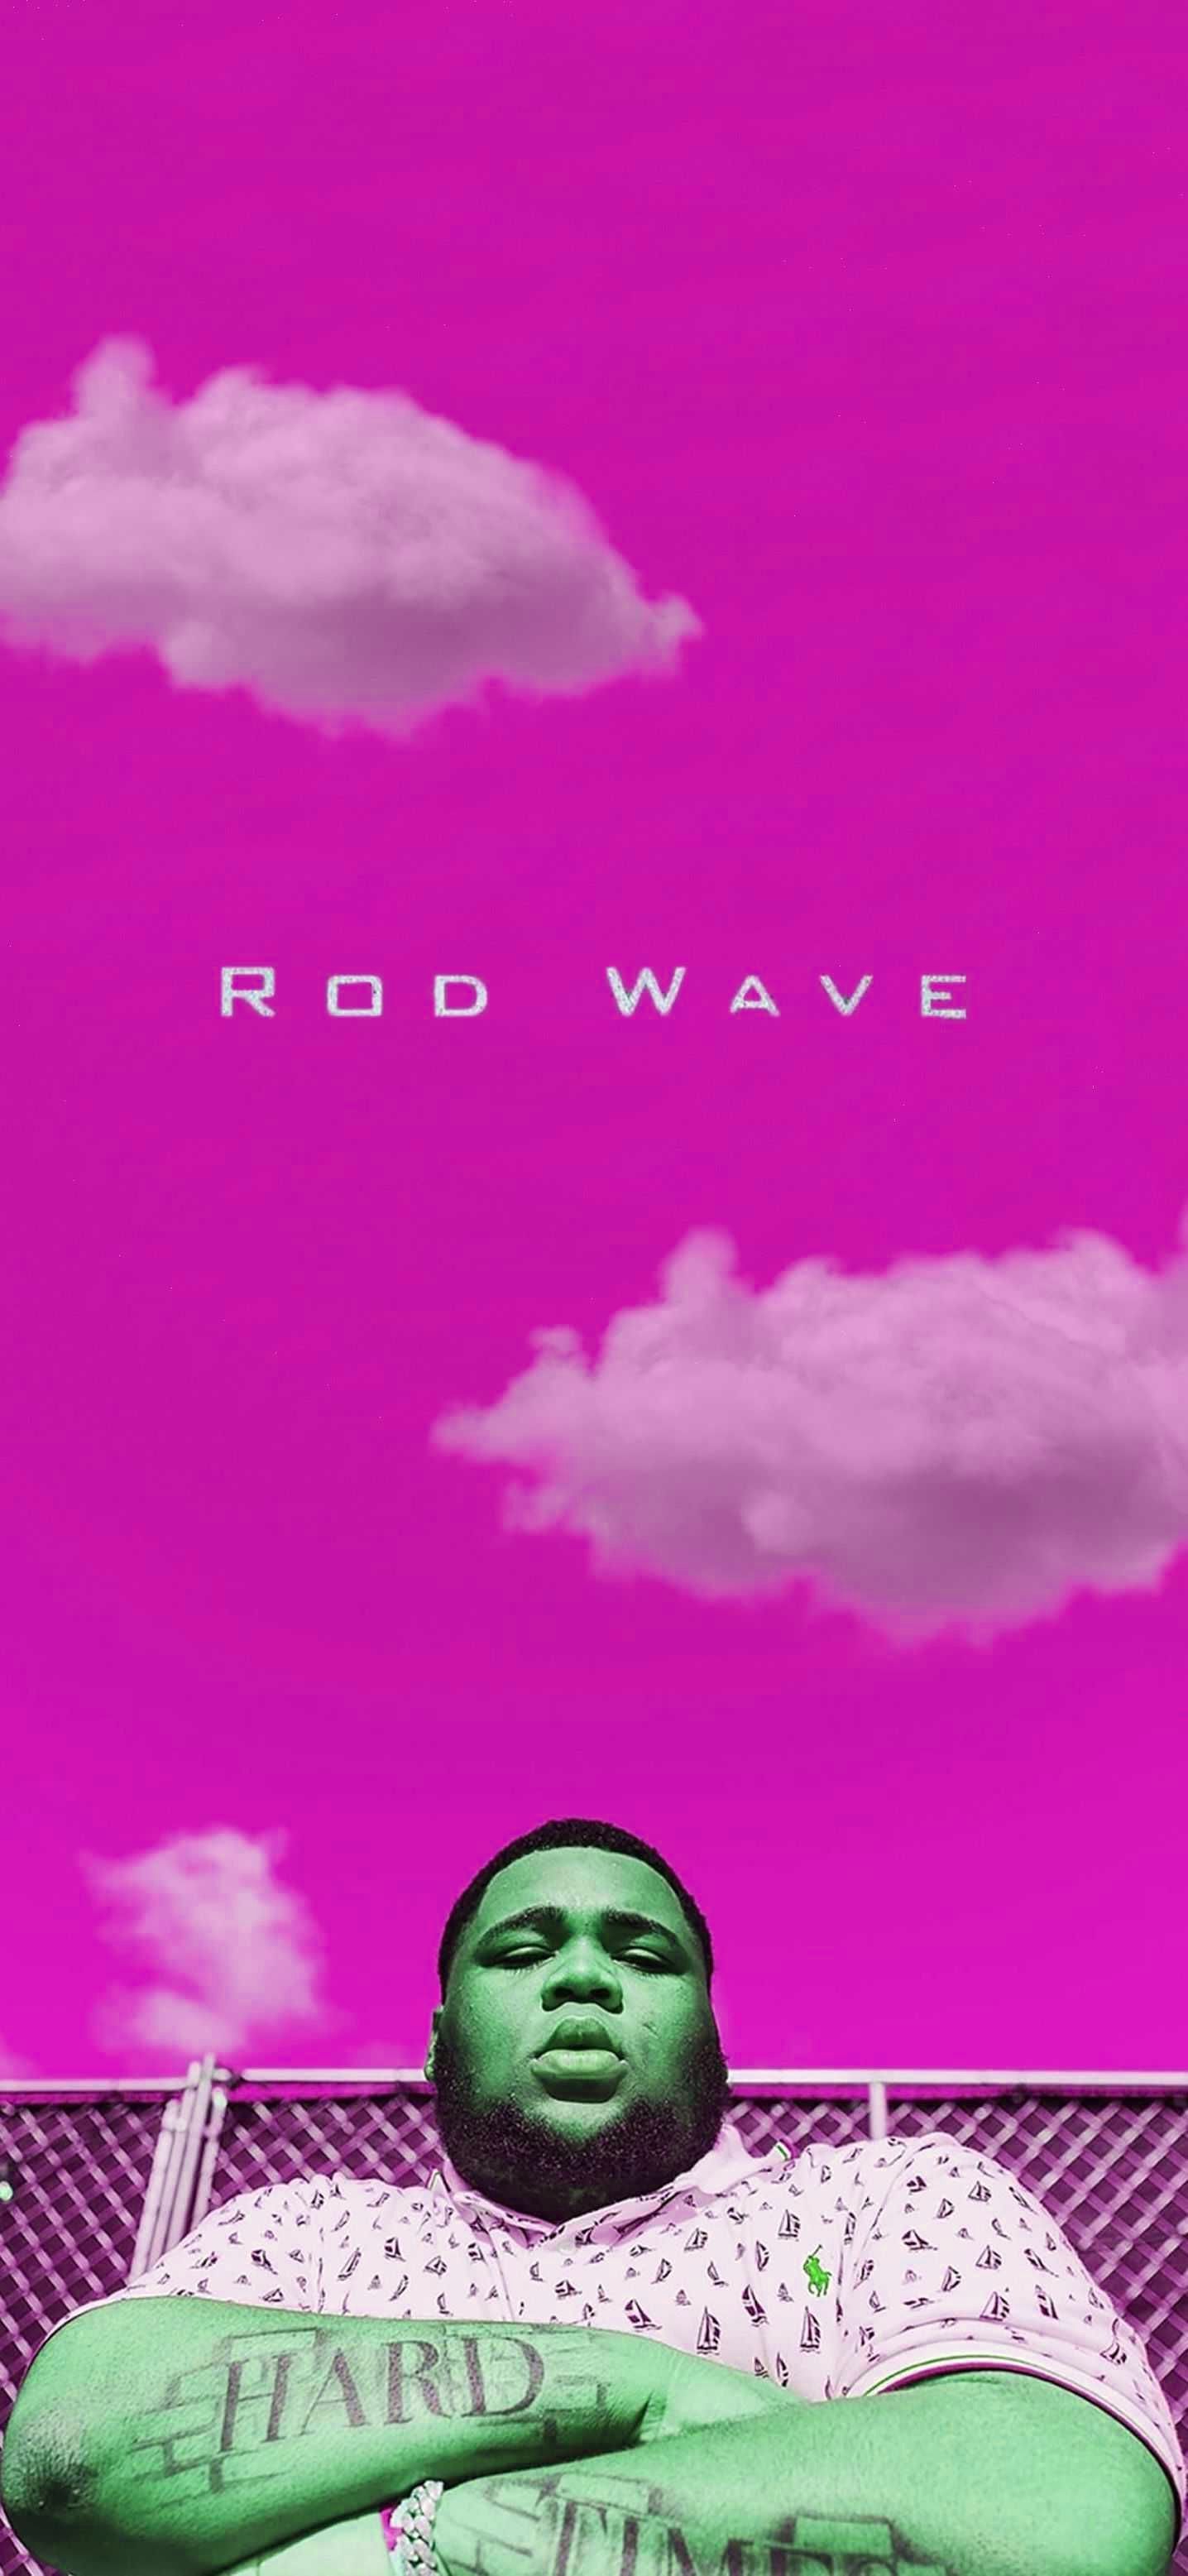 A poster for the album rod wave - Rod Wave